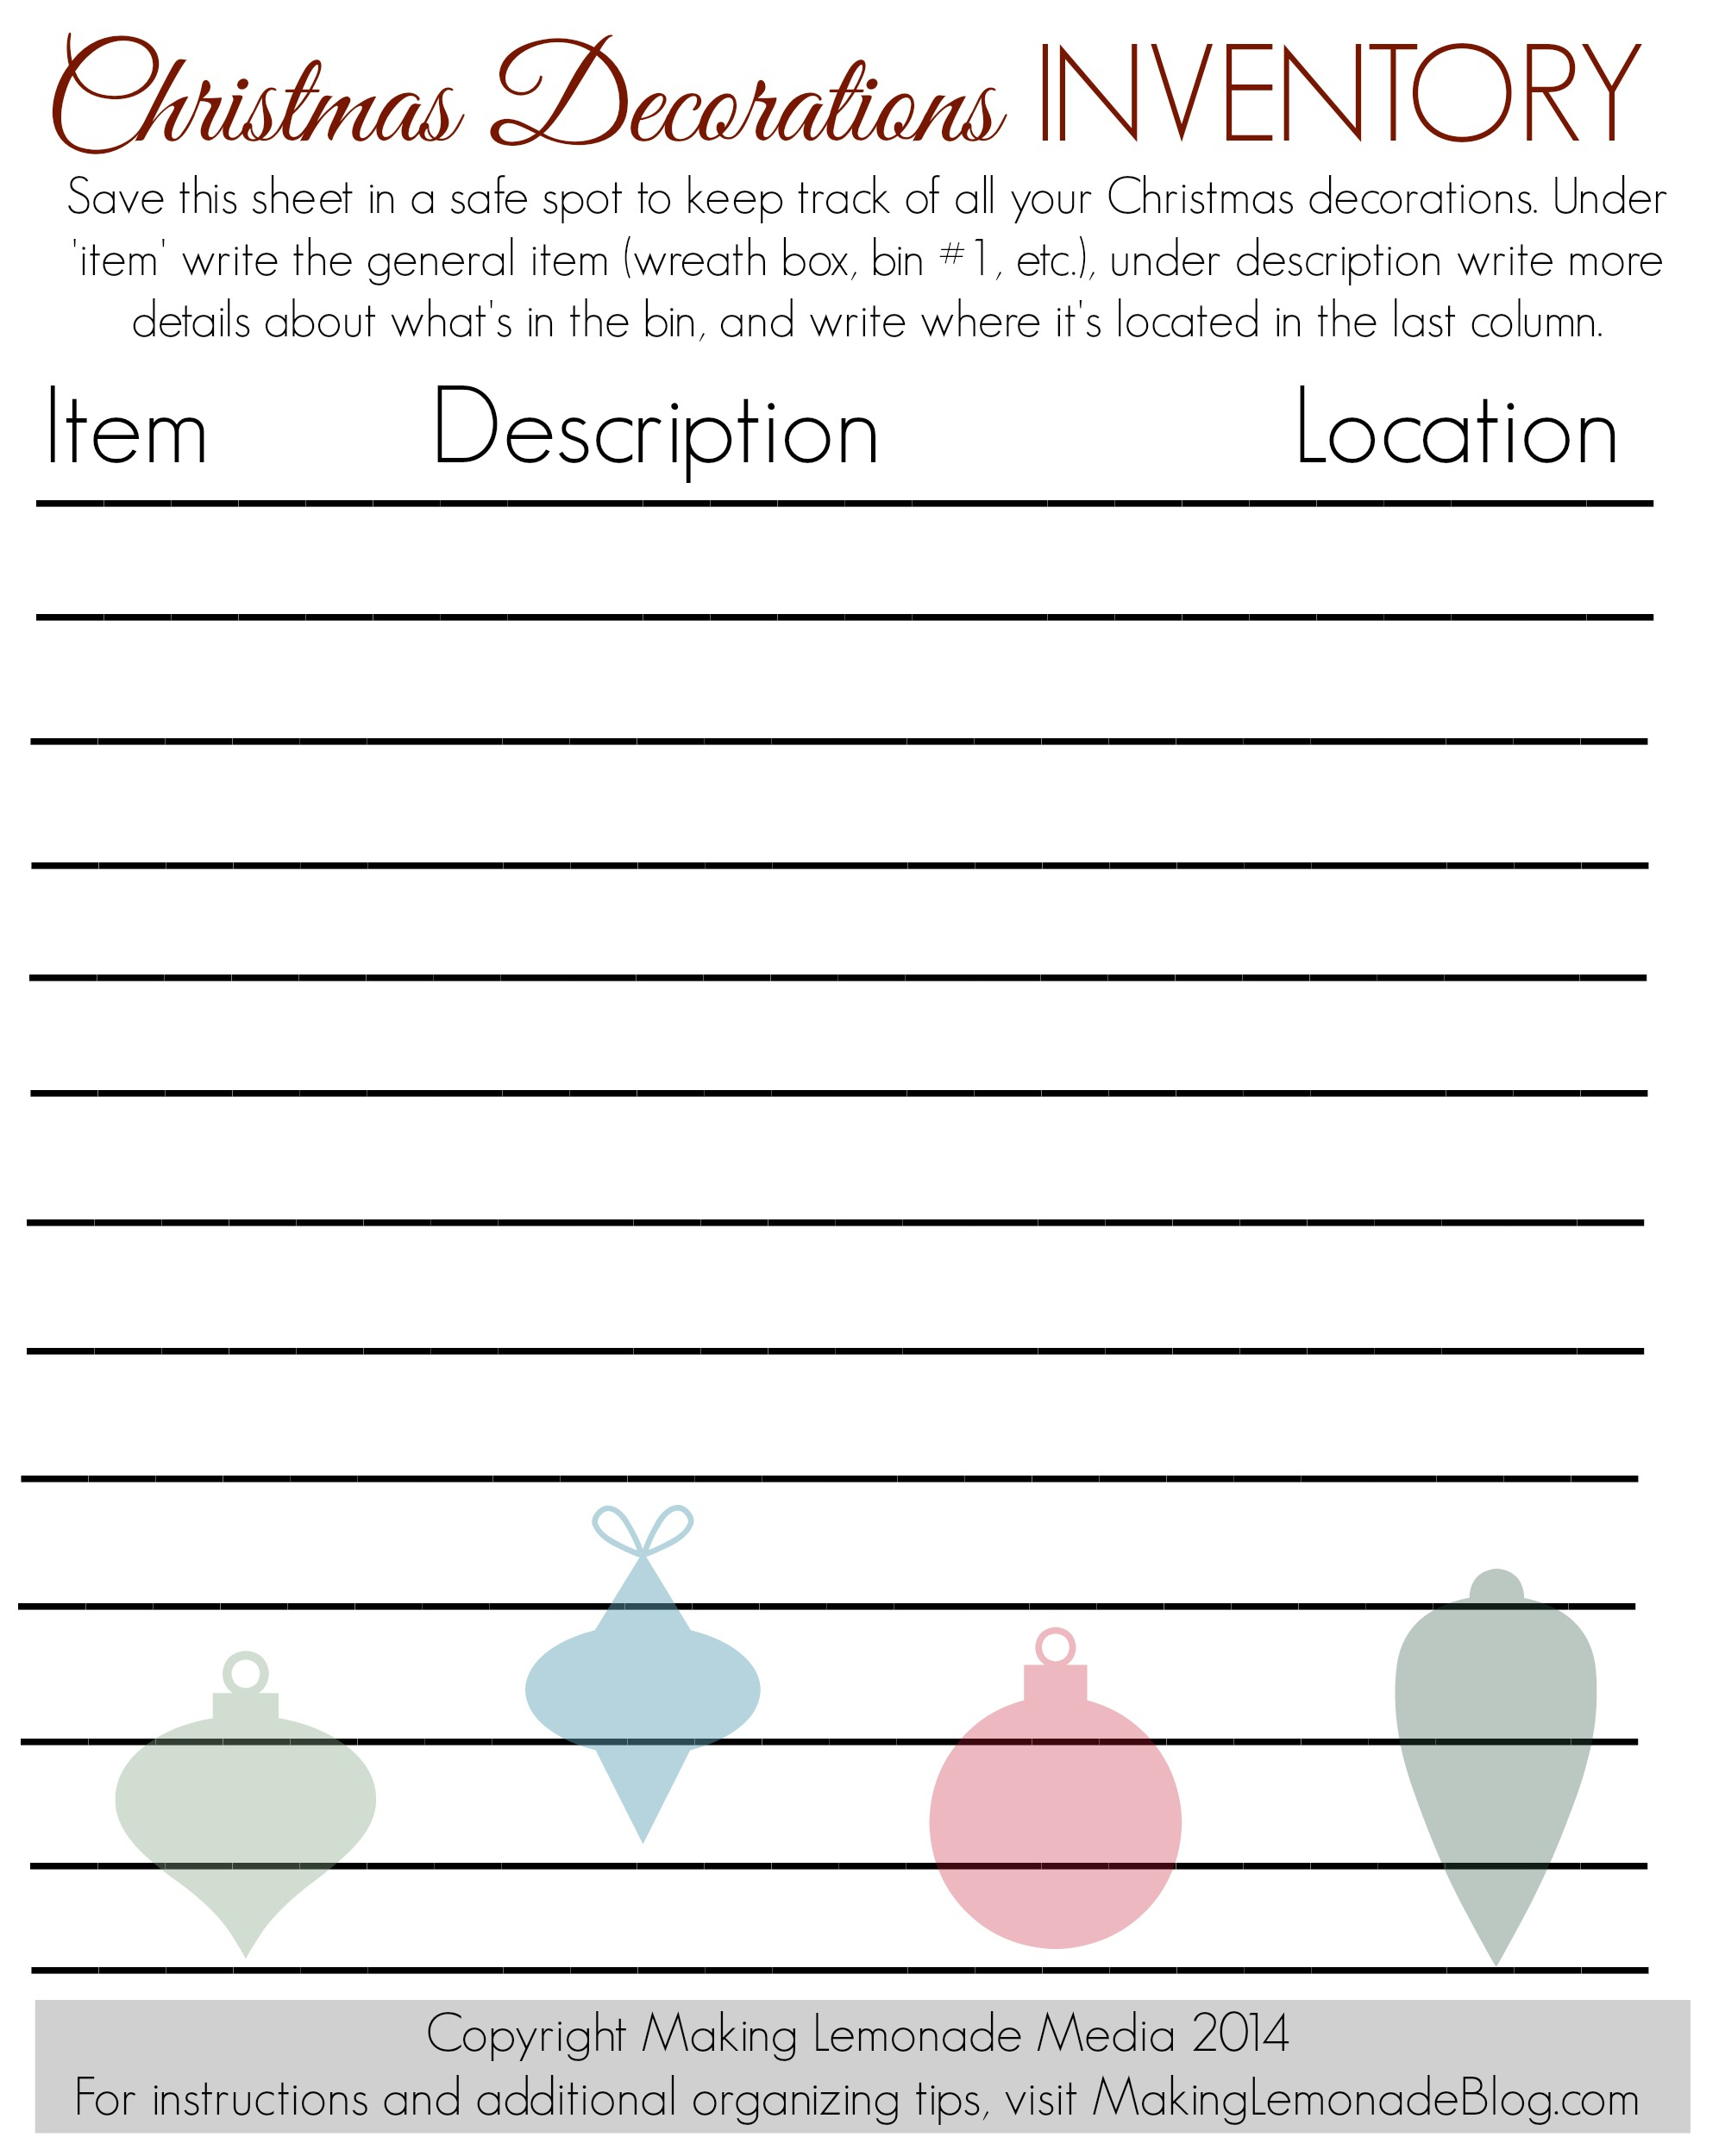 23 Free Printables To Organize Everything - Free Printable Planners And Organizers